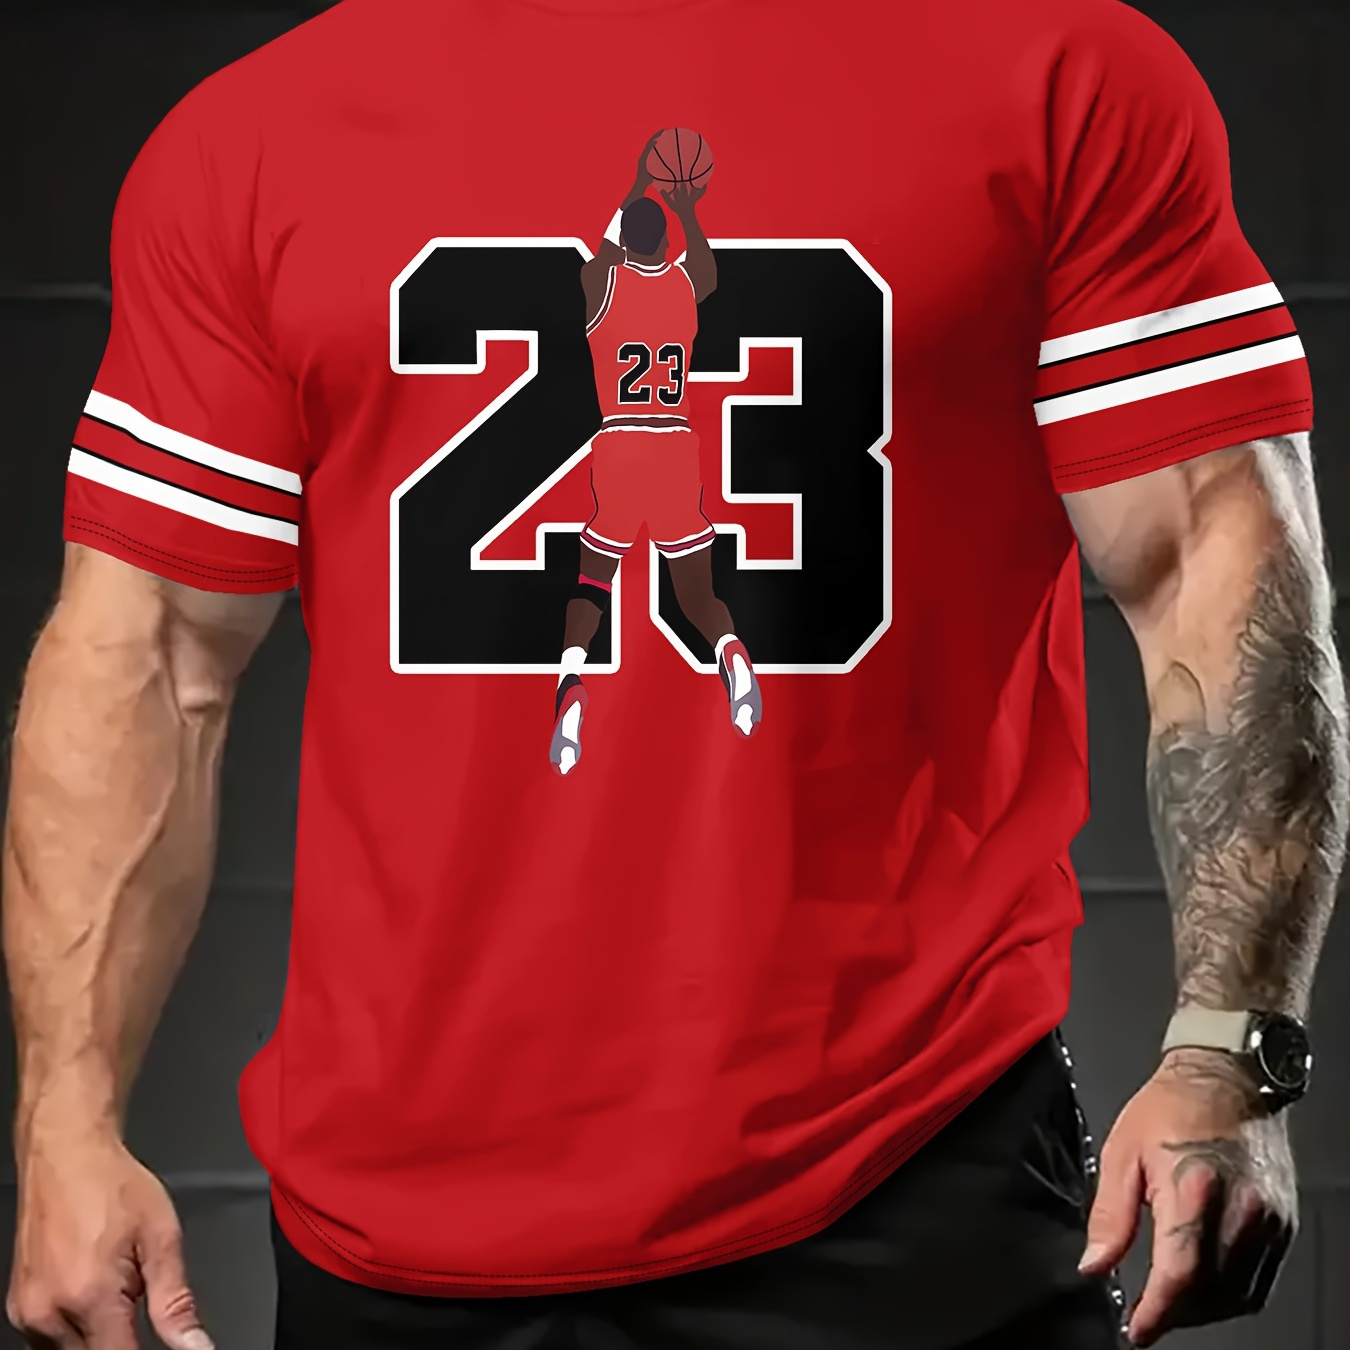 

Basketball Player & Number 23 Print T-shirt, Men's Casual Comfy Tee For Summer, Men's Short Sleeve Top For Sport And Casual Wear